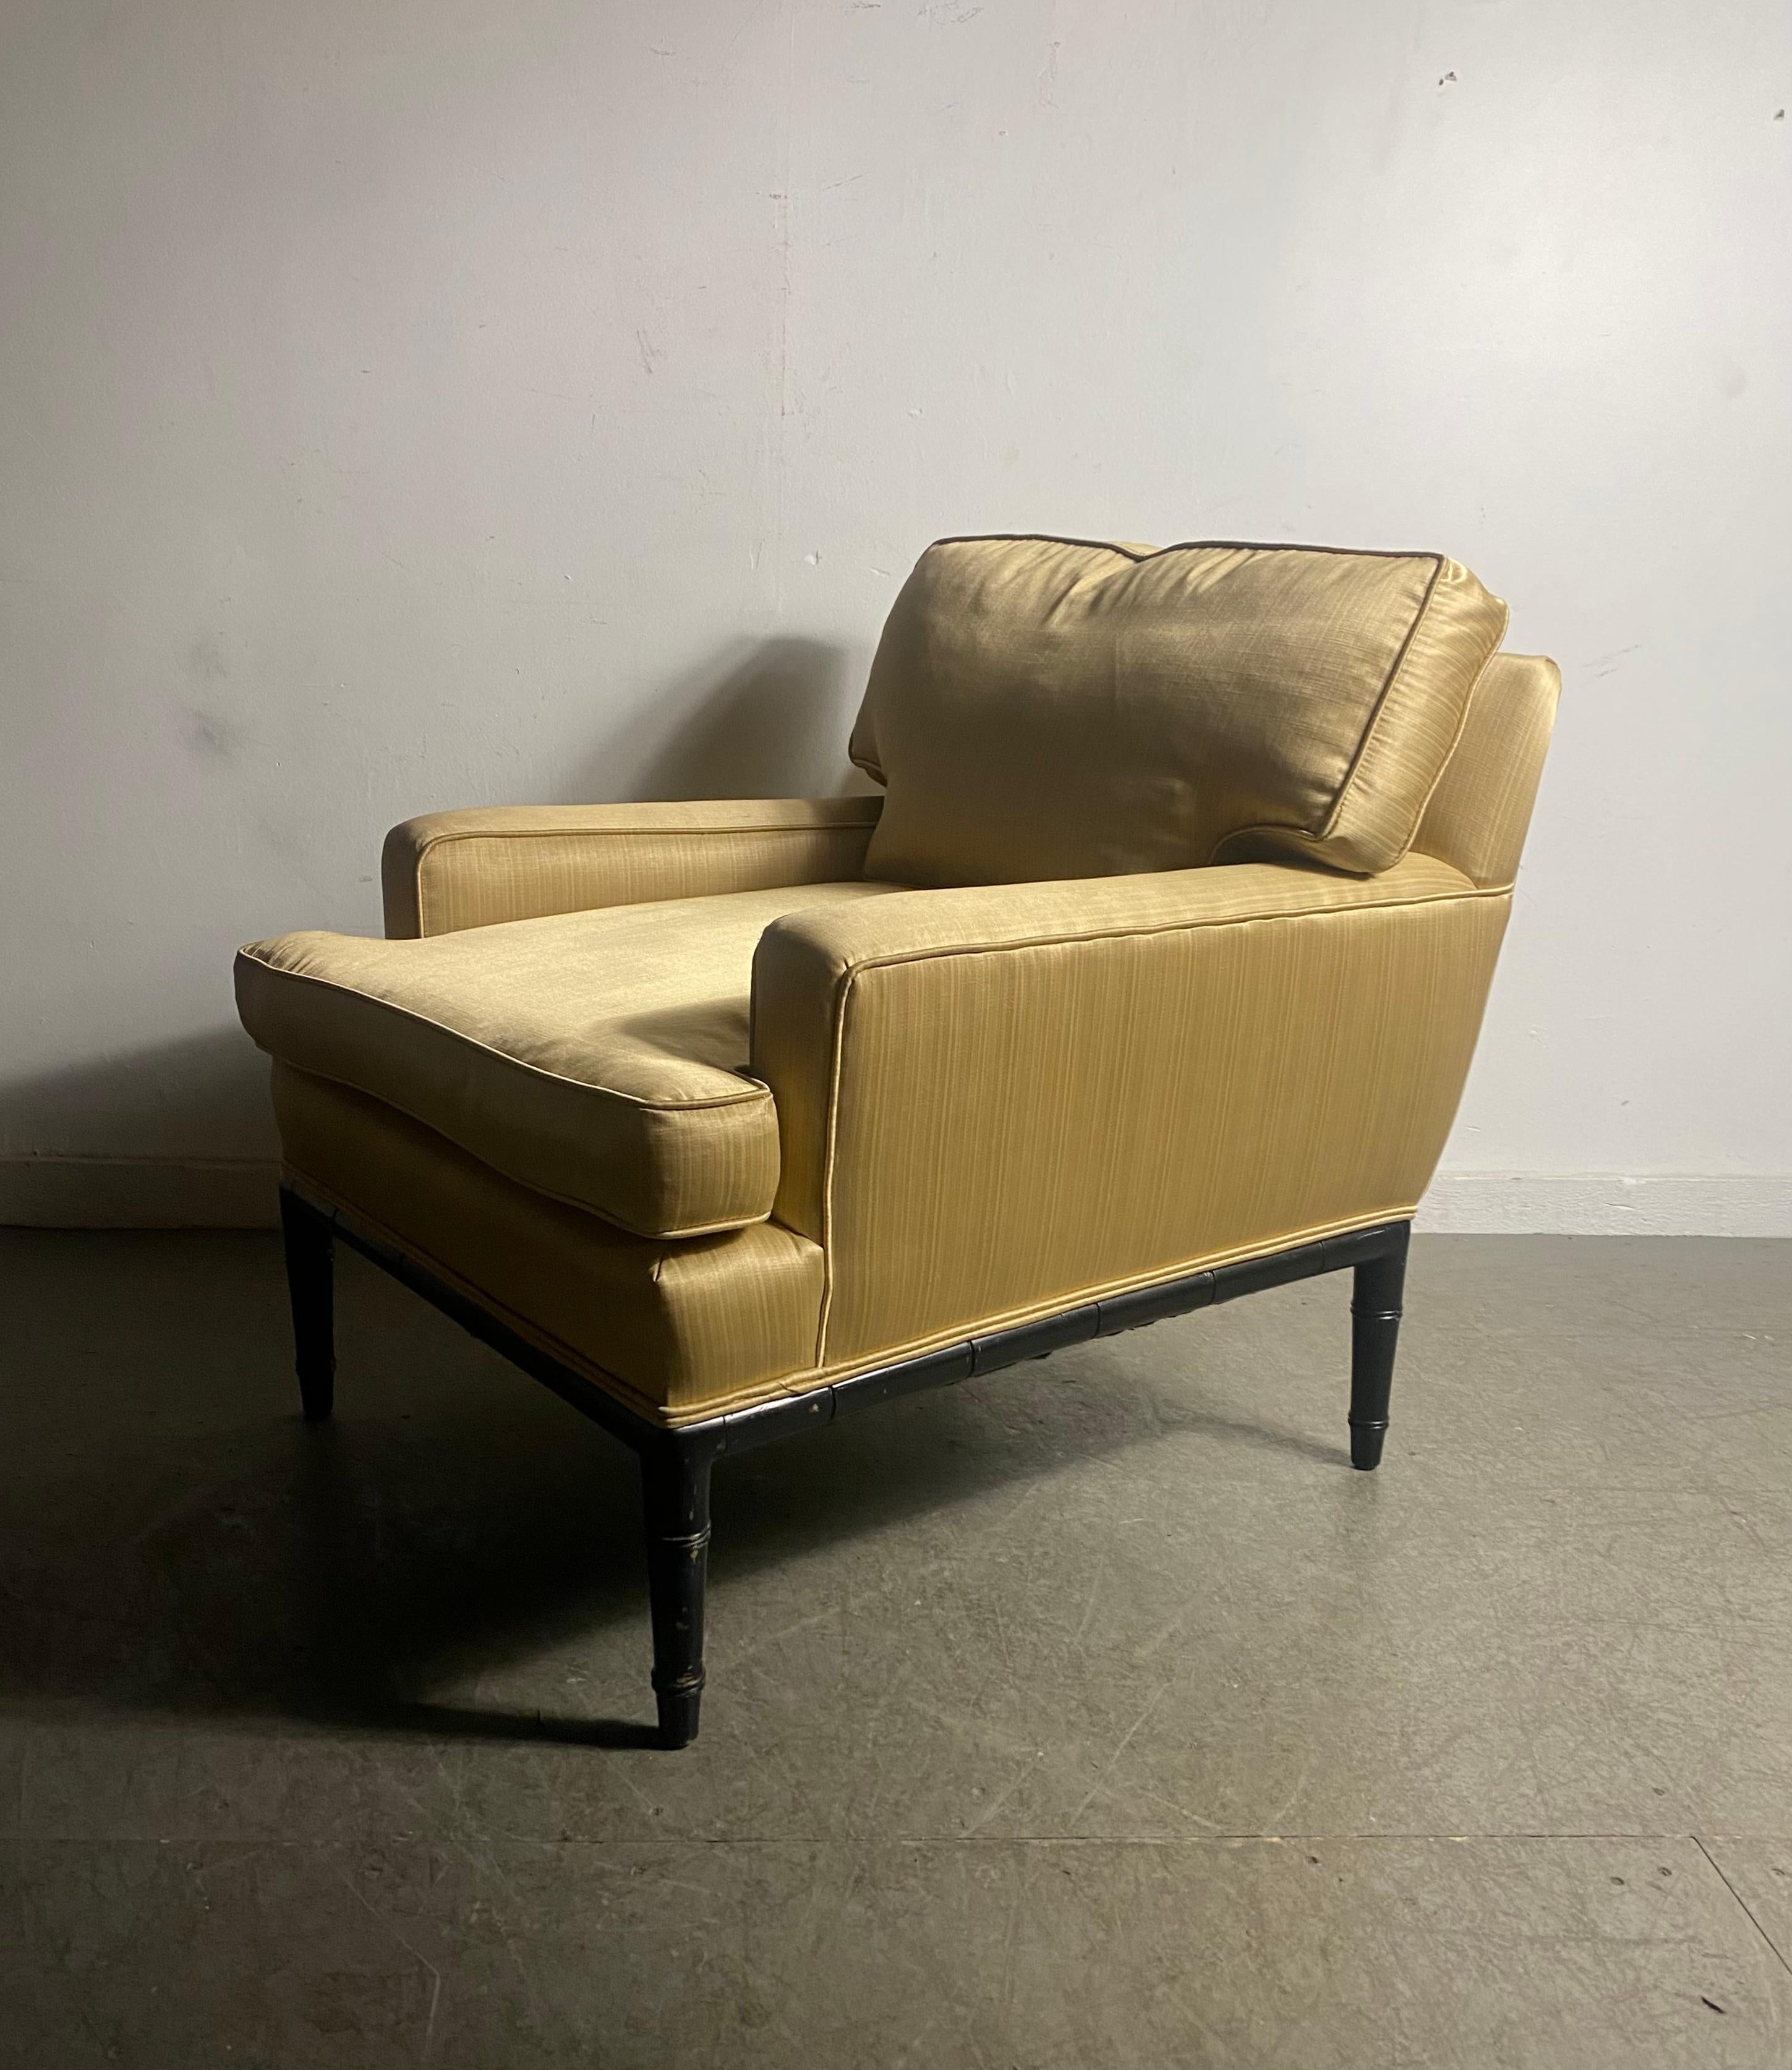 Stylized Low profile Lounge Chair by Baker,,Lacquer Faux Bamboo,,silk, down filled..Extremely comfortable.. Superior quality and construction..Nice original condition,,minor snags.thread pulls to back (see photo) Hand delivery avail to New York City